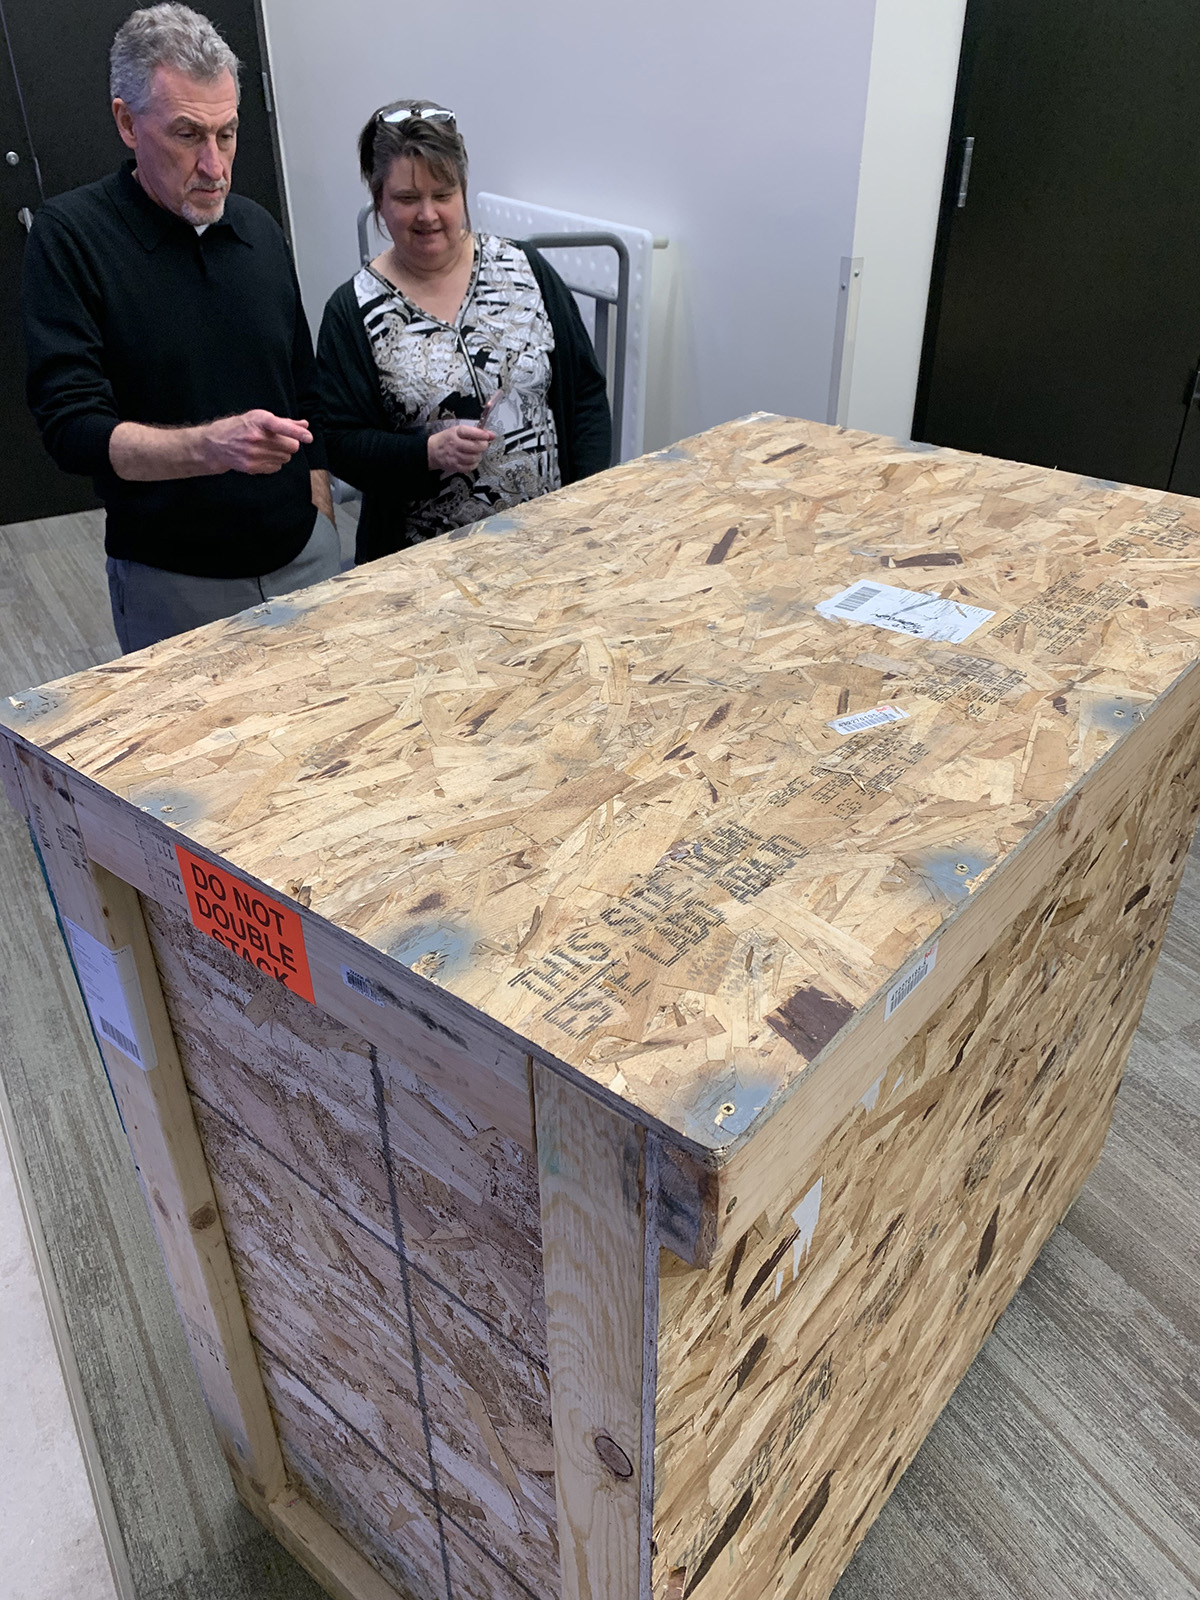 Interim Dean of University Libraries John S. Wilson and Director of Central Libraries' Special Collections Beth Farwell examine the shipping crate containing the St. John's Bible.